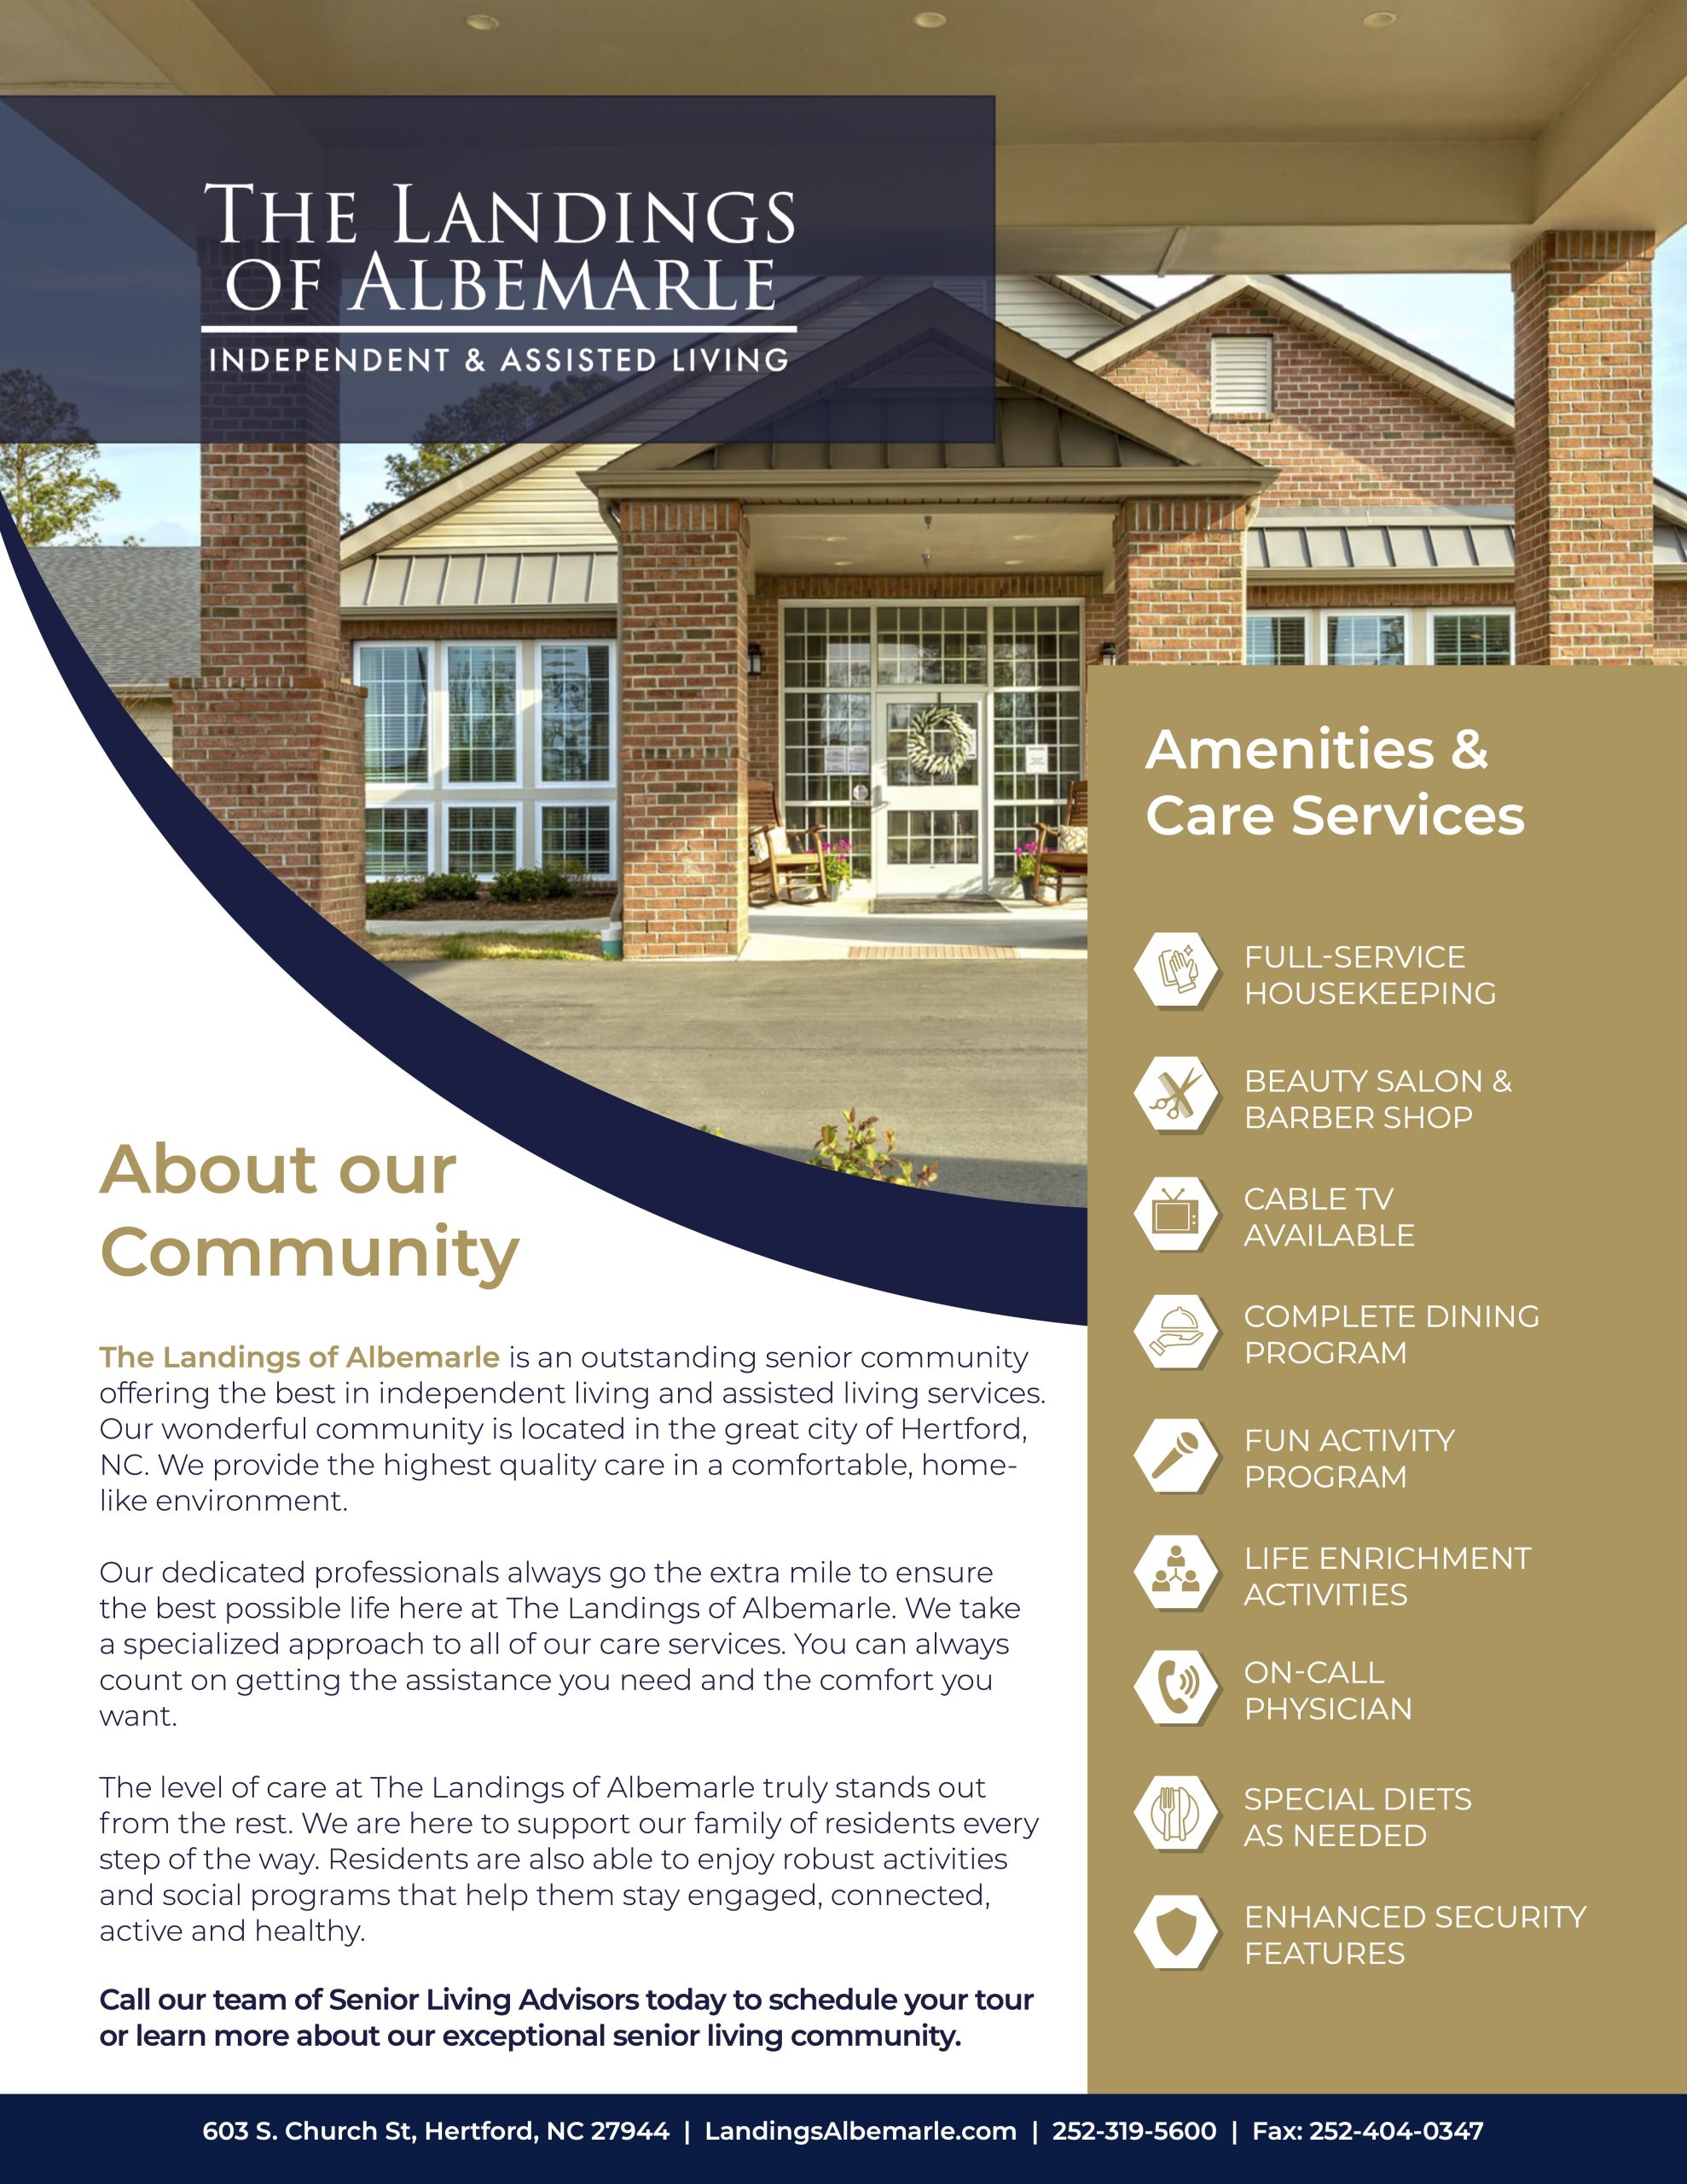 TLO Albemarle - About our Services